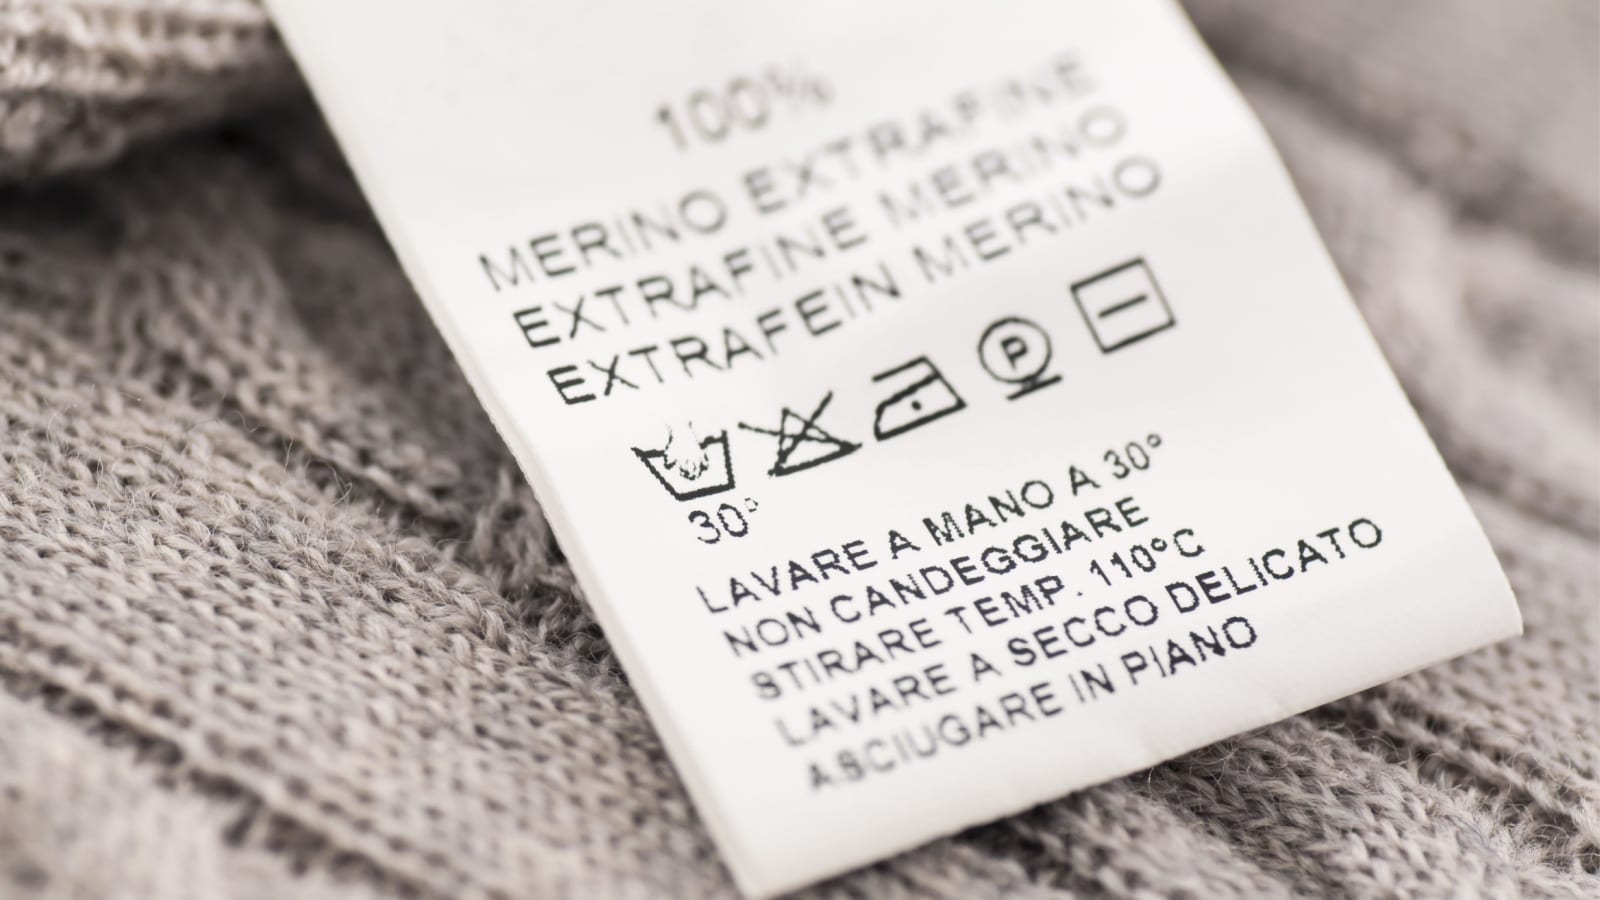 loundry symbols on the wool clothes